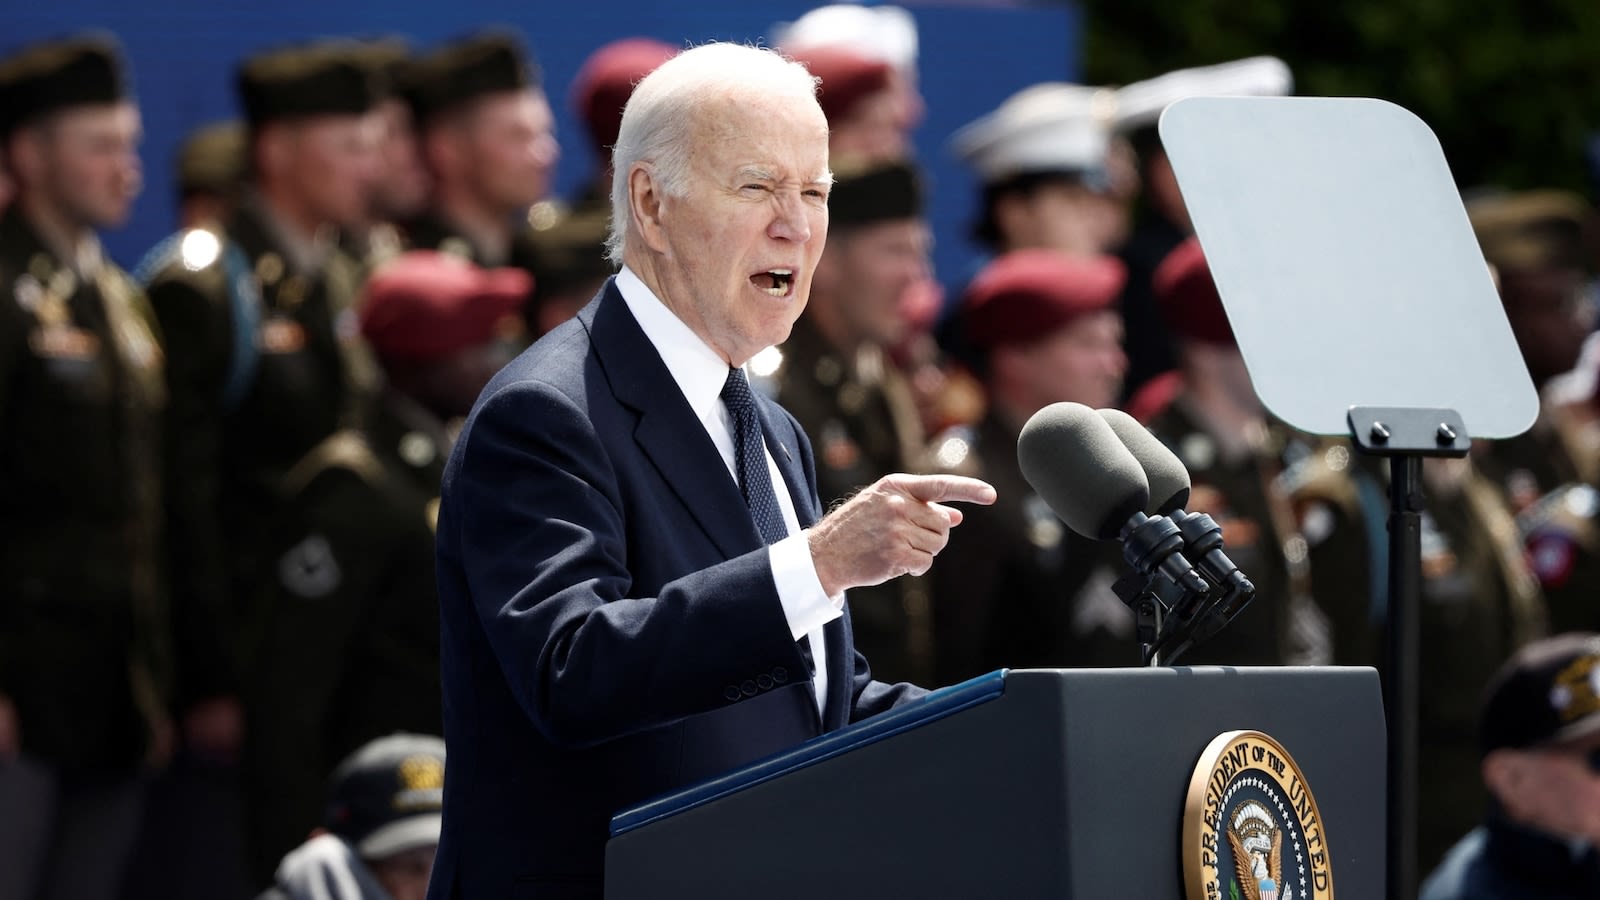 Biden offers forceful defense of democracy in Normandy speech aimed at American audience